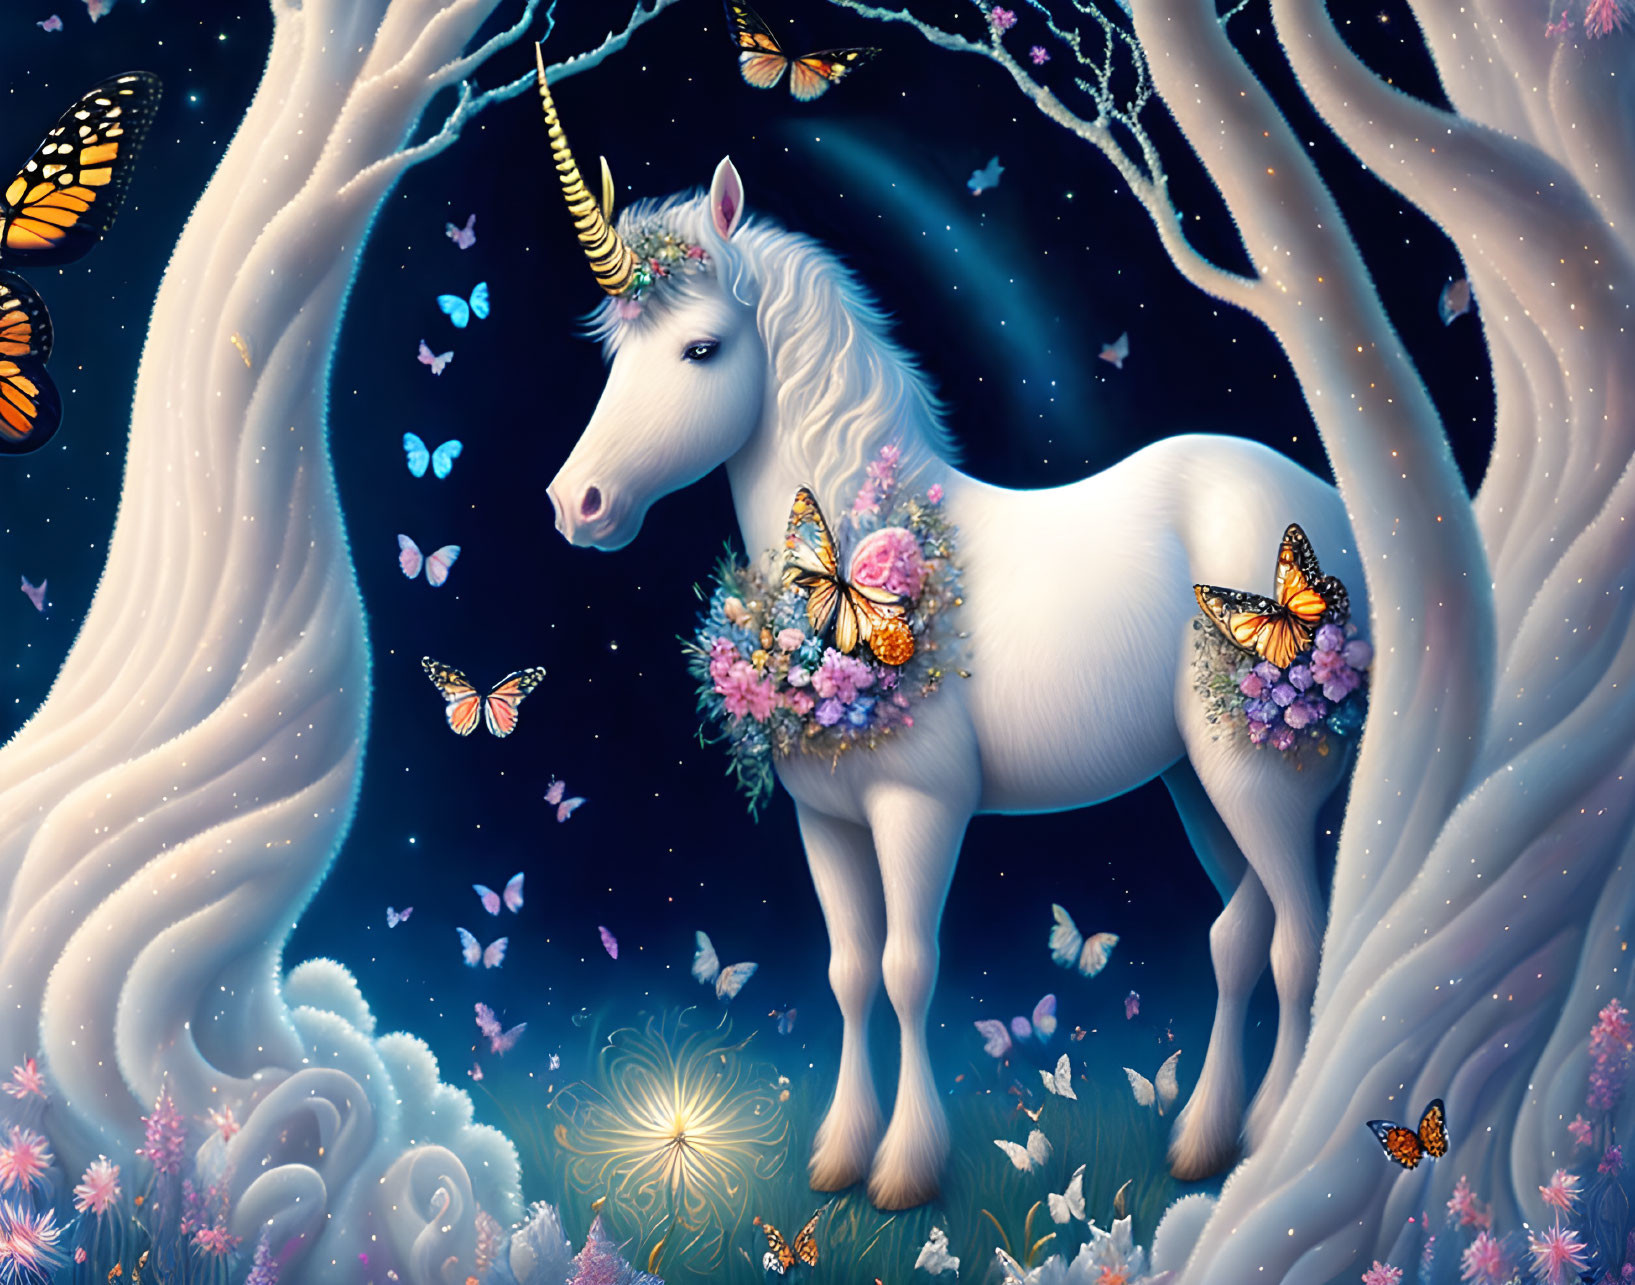 White unicorn with flowers in magical forest with butterflies and glowing orbs